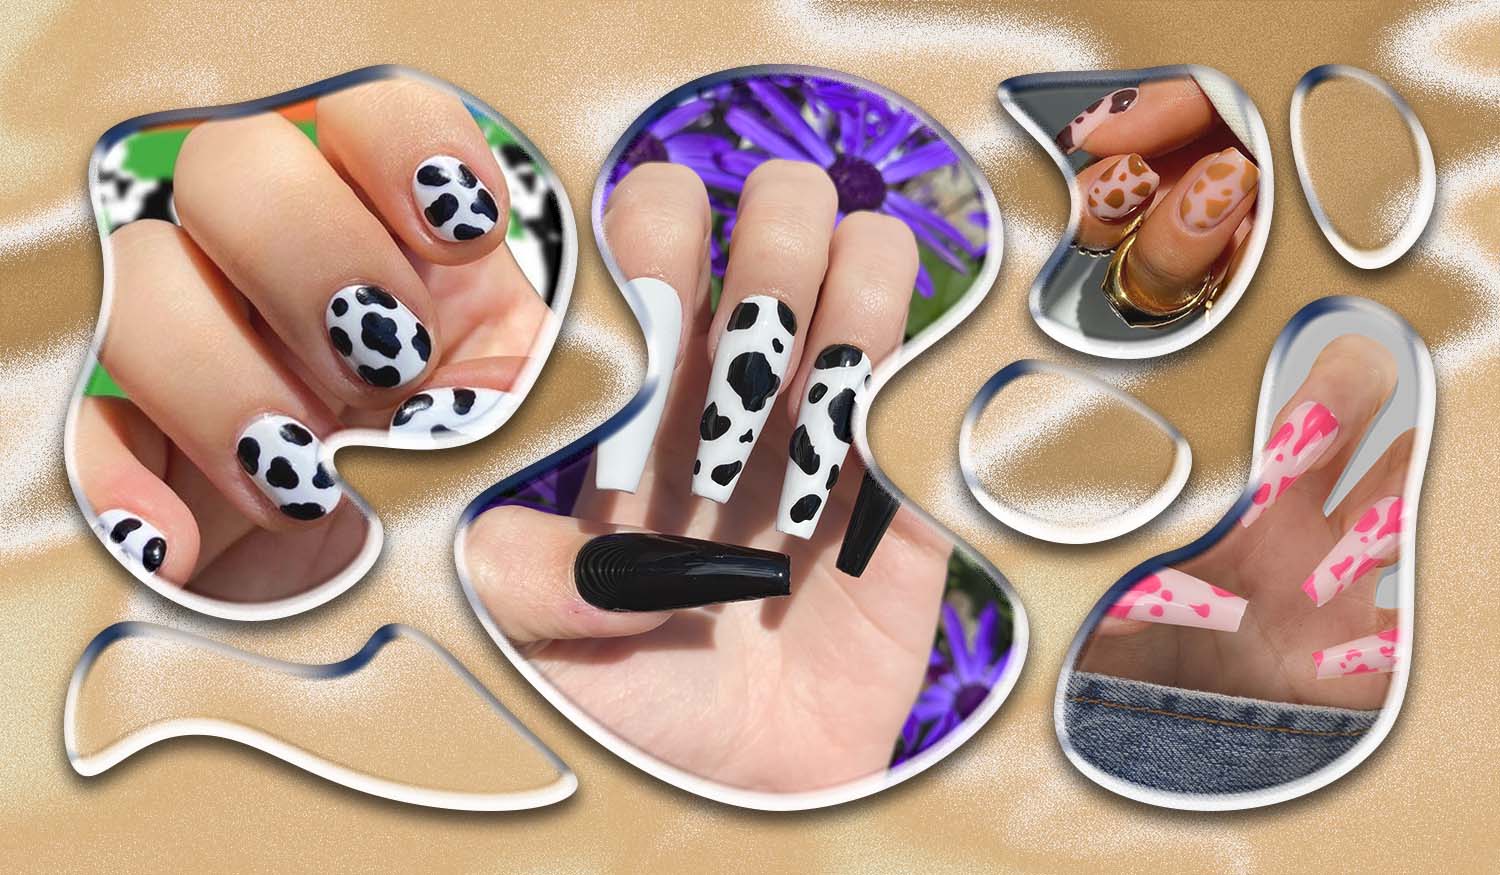 Cow Nails | How to Do a Cow Print Acrylic Nail Design | DipWell